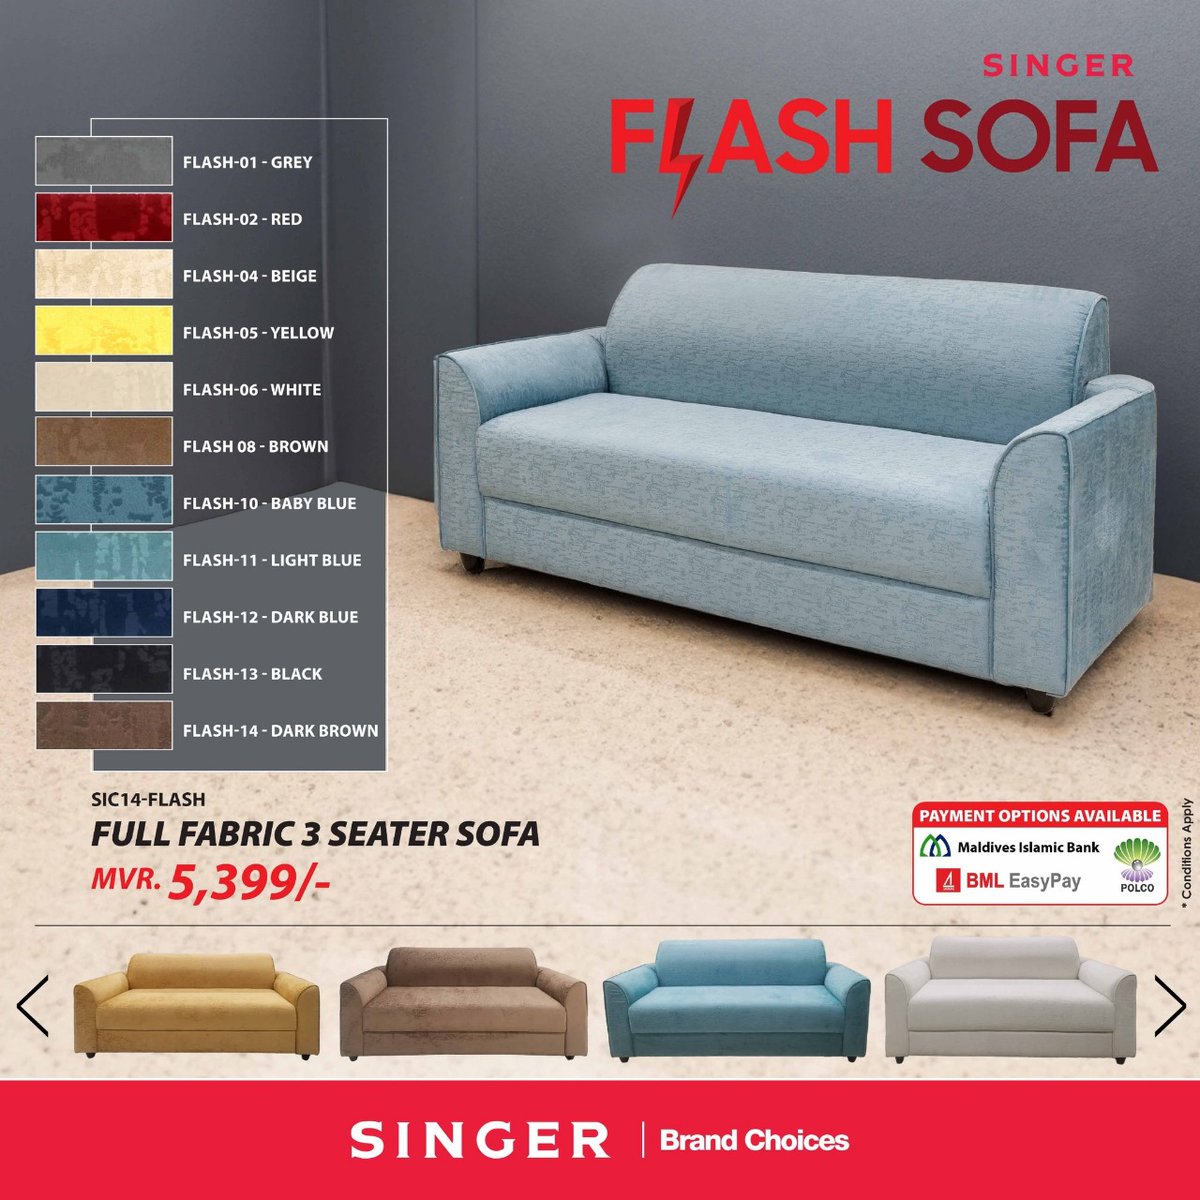 Upgrade your comfort with Singer's 6ft 3-seater sofa, now only 5399/-. Reserve yours today and elevate your sofa experience! #sofaSale #furniture #livingRoom #homeDecor #singerFurniture #comfort #InteriorDesign #homeFurnishings #sofaSet #cozyLiving #mplflat #stelcoflats